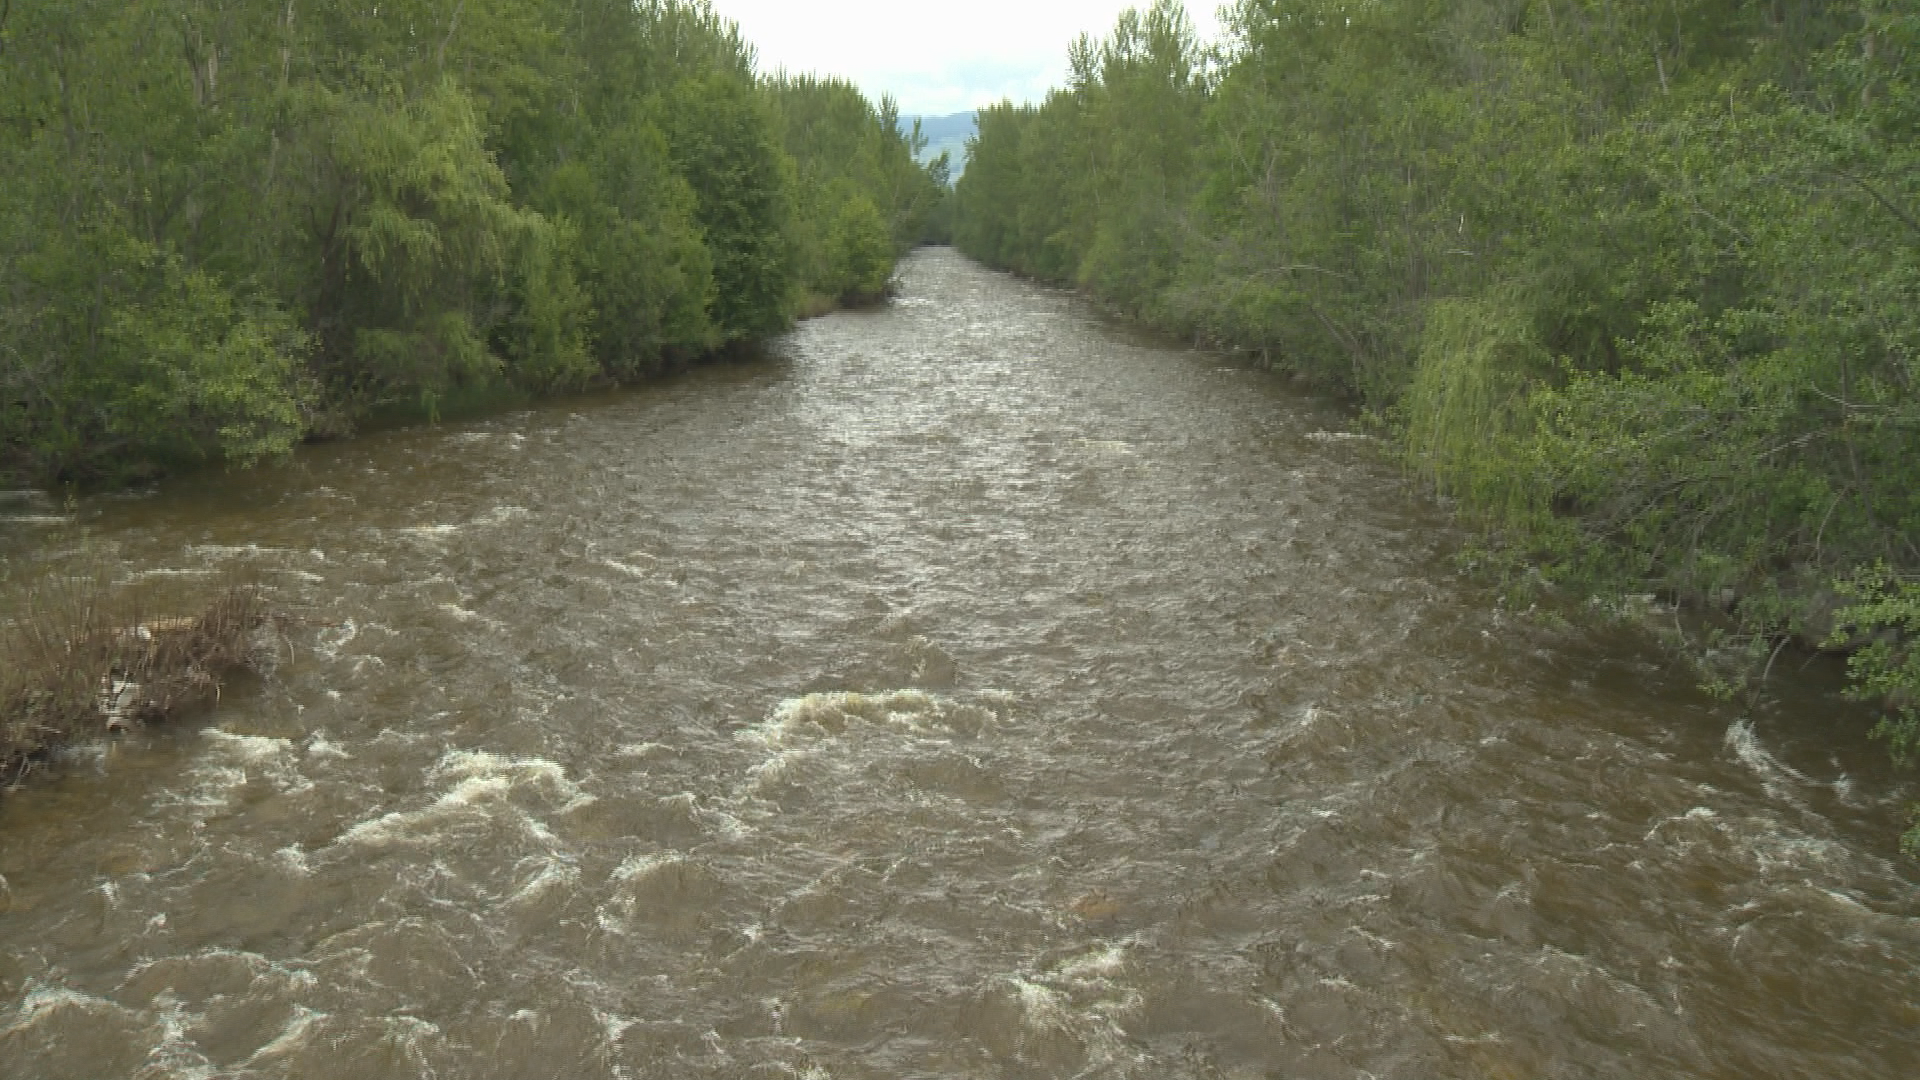 High streamflow advisory issued for parts of B.C.